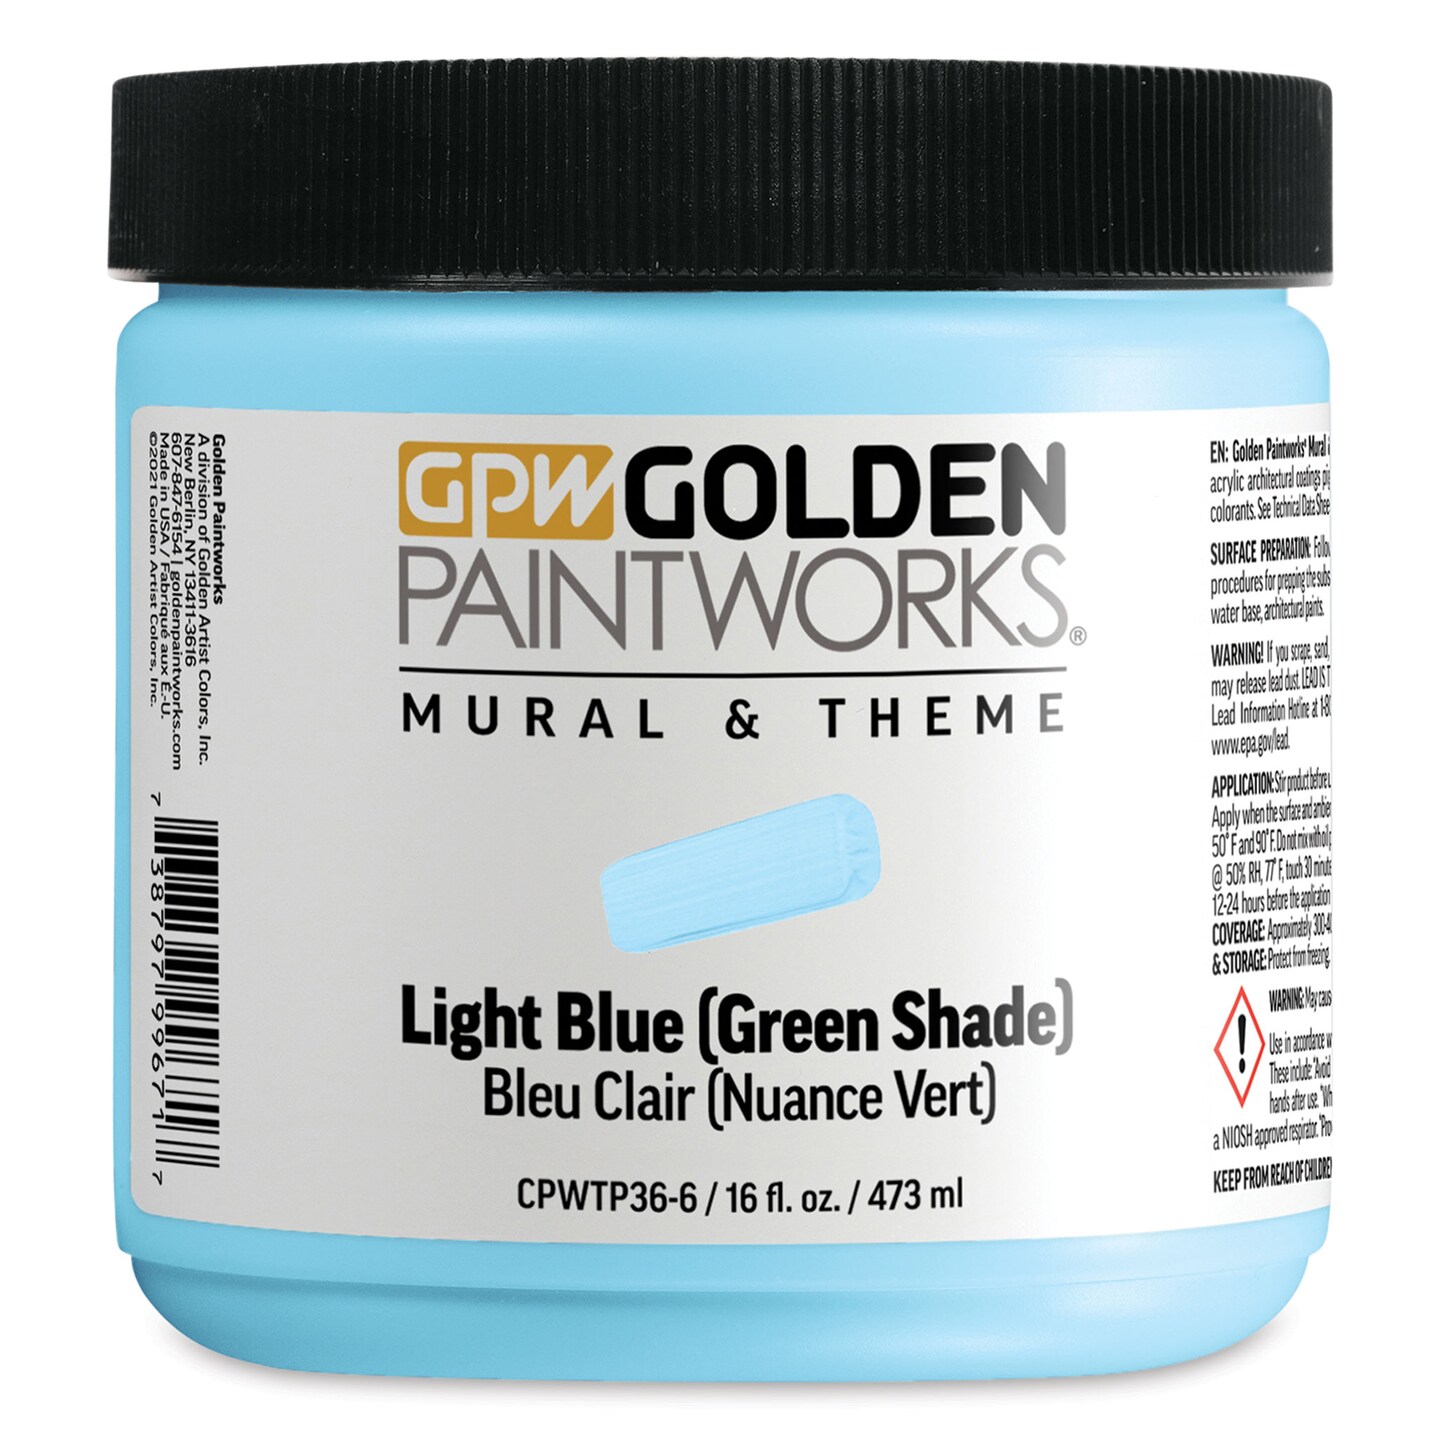 Golden Paintworks Mural and Theme Acrylic Paint - Light Blue (Green Shade), 16 oz, Jar